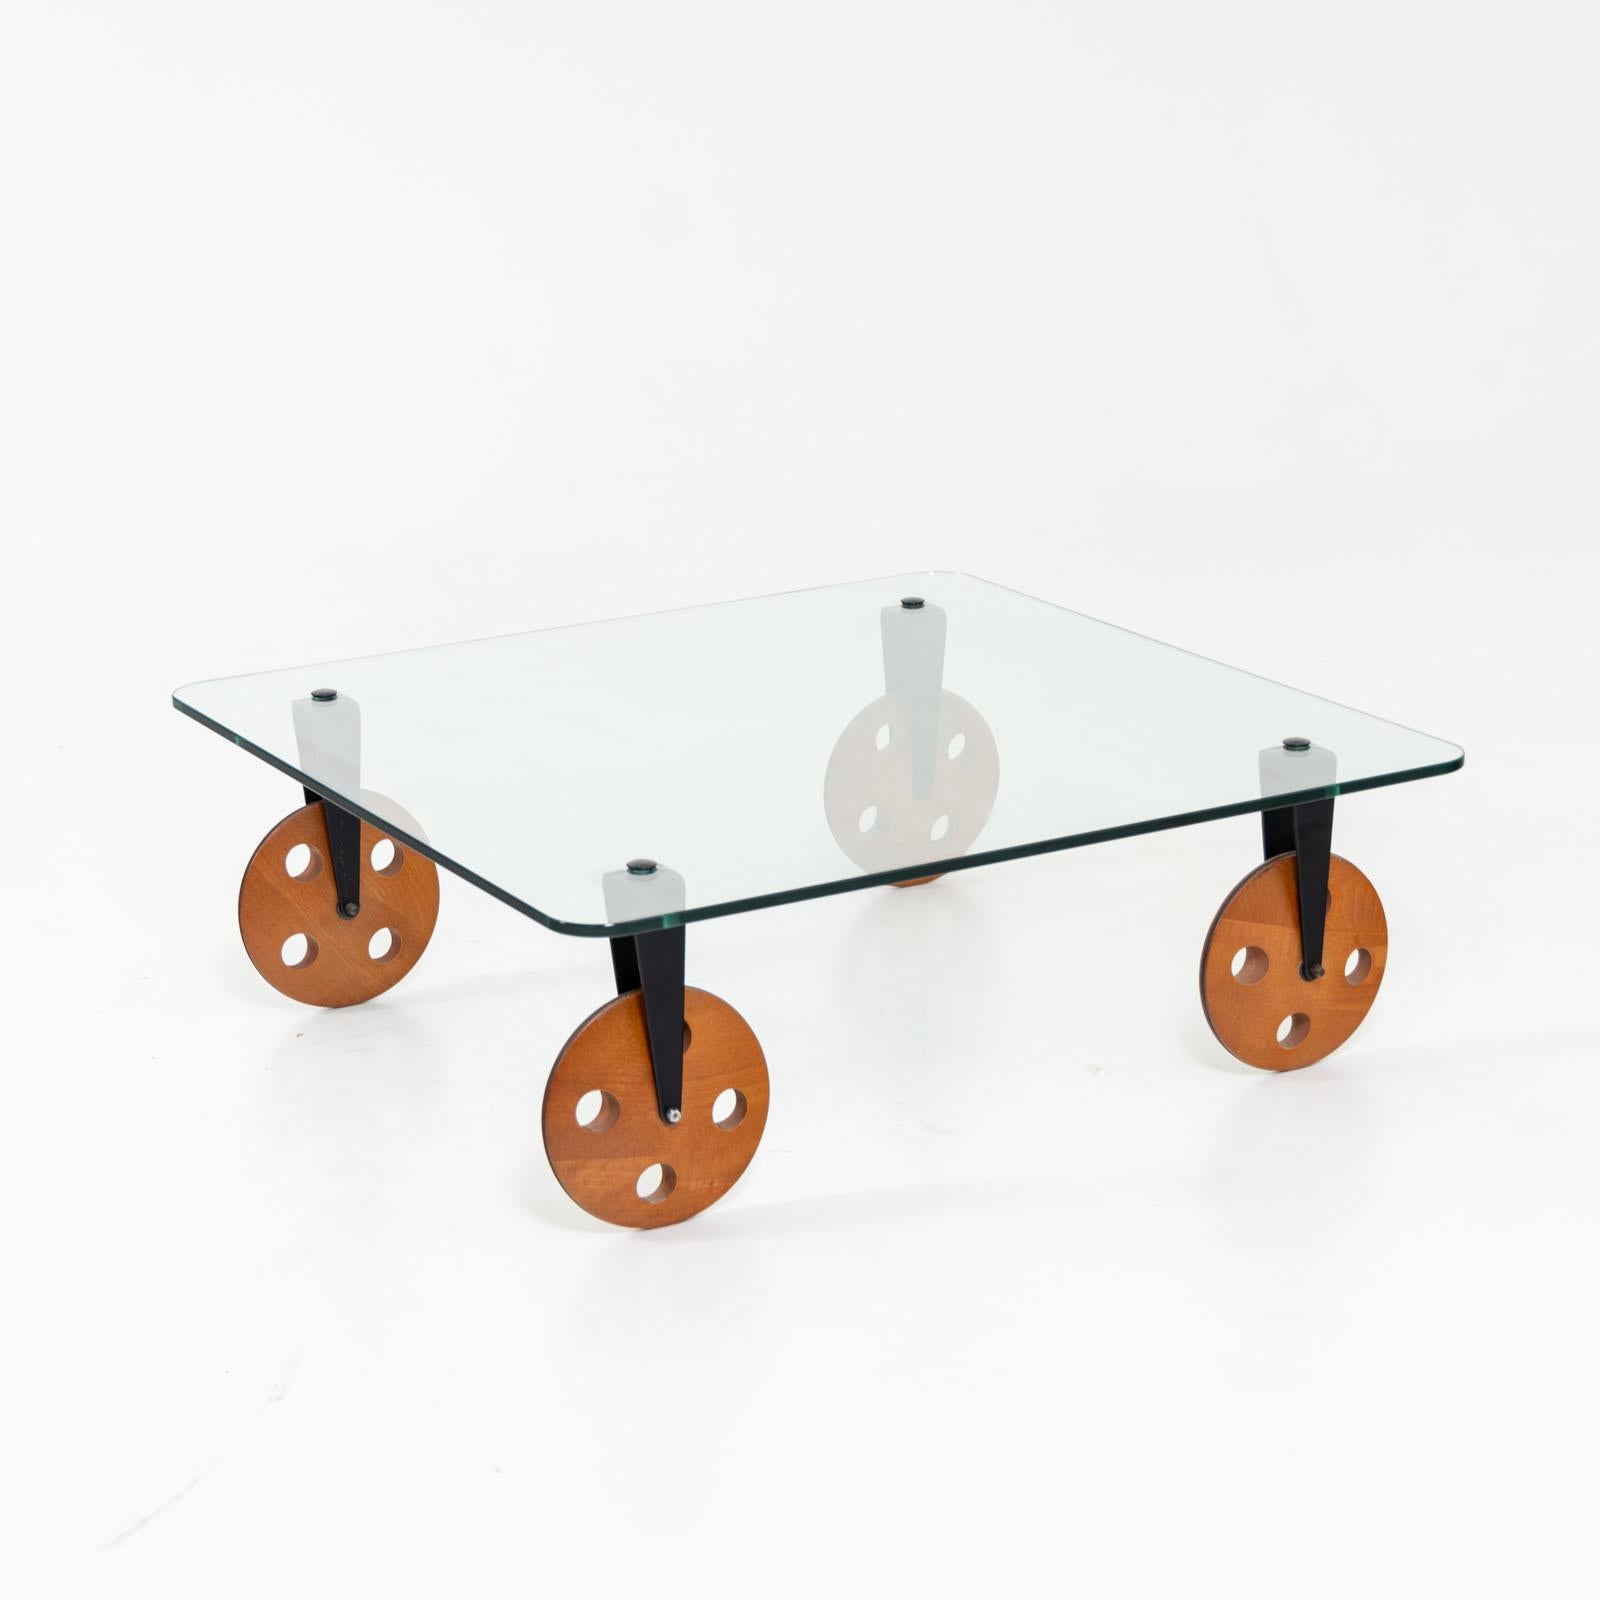 Square coffee table with glass top in the style of Gae Aulenti. The table stands on wooden wheels that are connected to the top via black metal mountings.